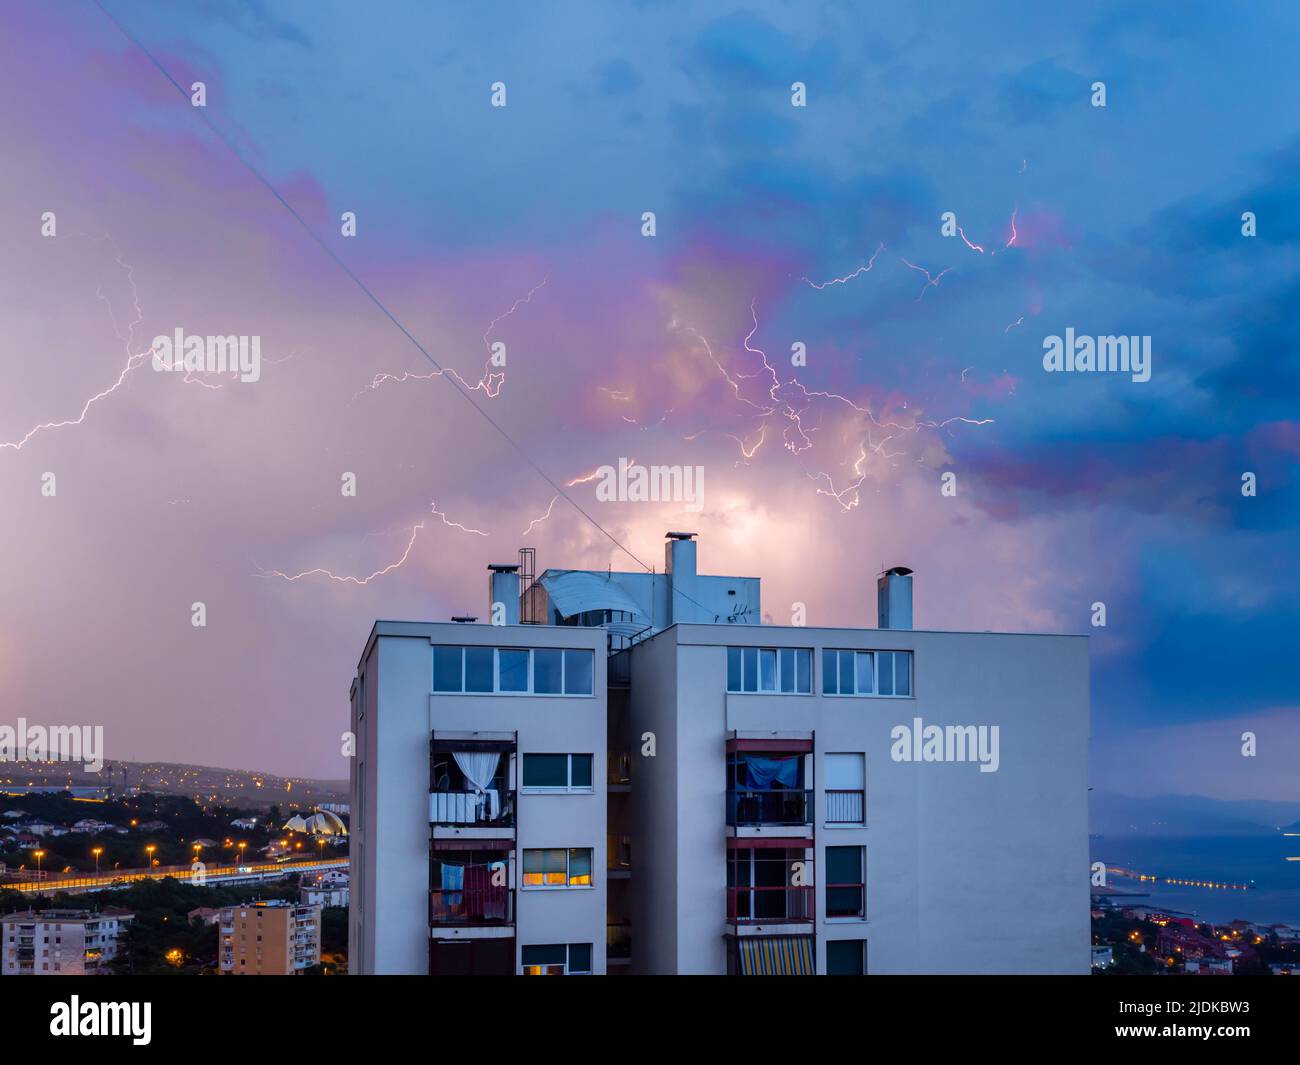 Thunder lightning dancing on wire in sky above building Stock Photo